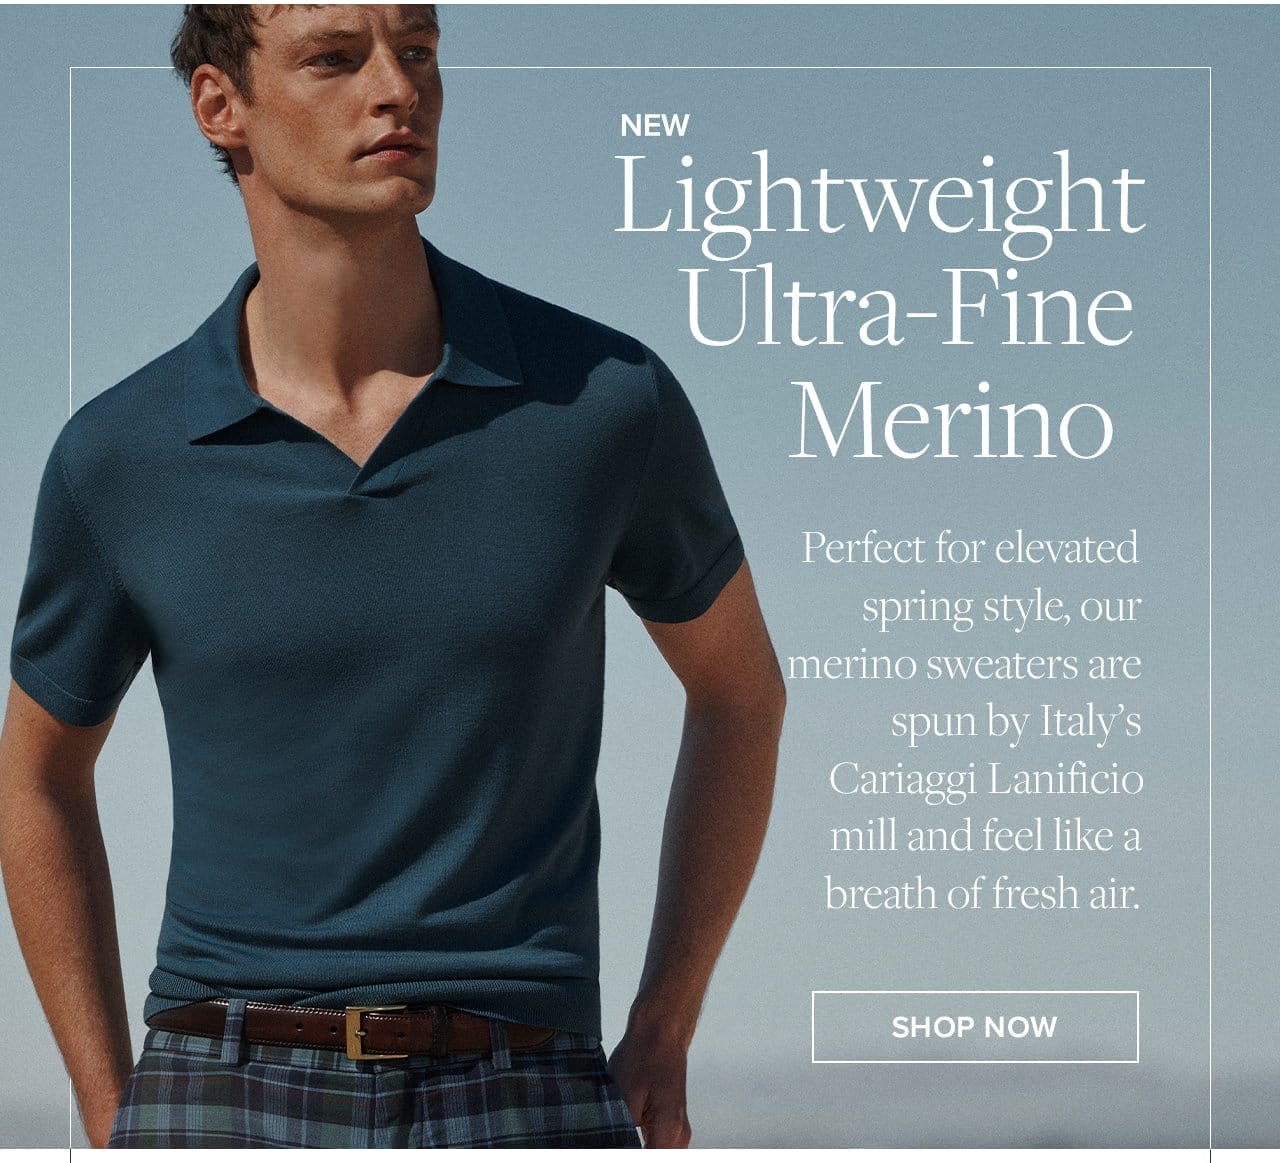 New Lightweight Ultra-Fine Merino Perfect for elevated spring style, our merino sweaters are spun by Italy's Cariaggi Lanificio mill and feel like a breath of fresh air. Shop Now